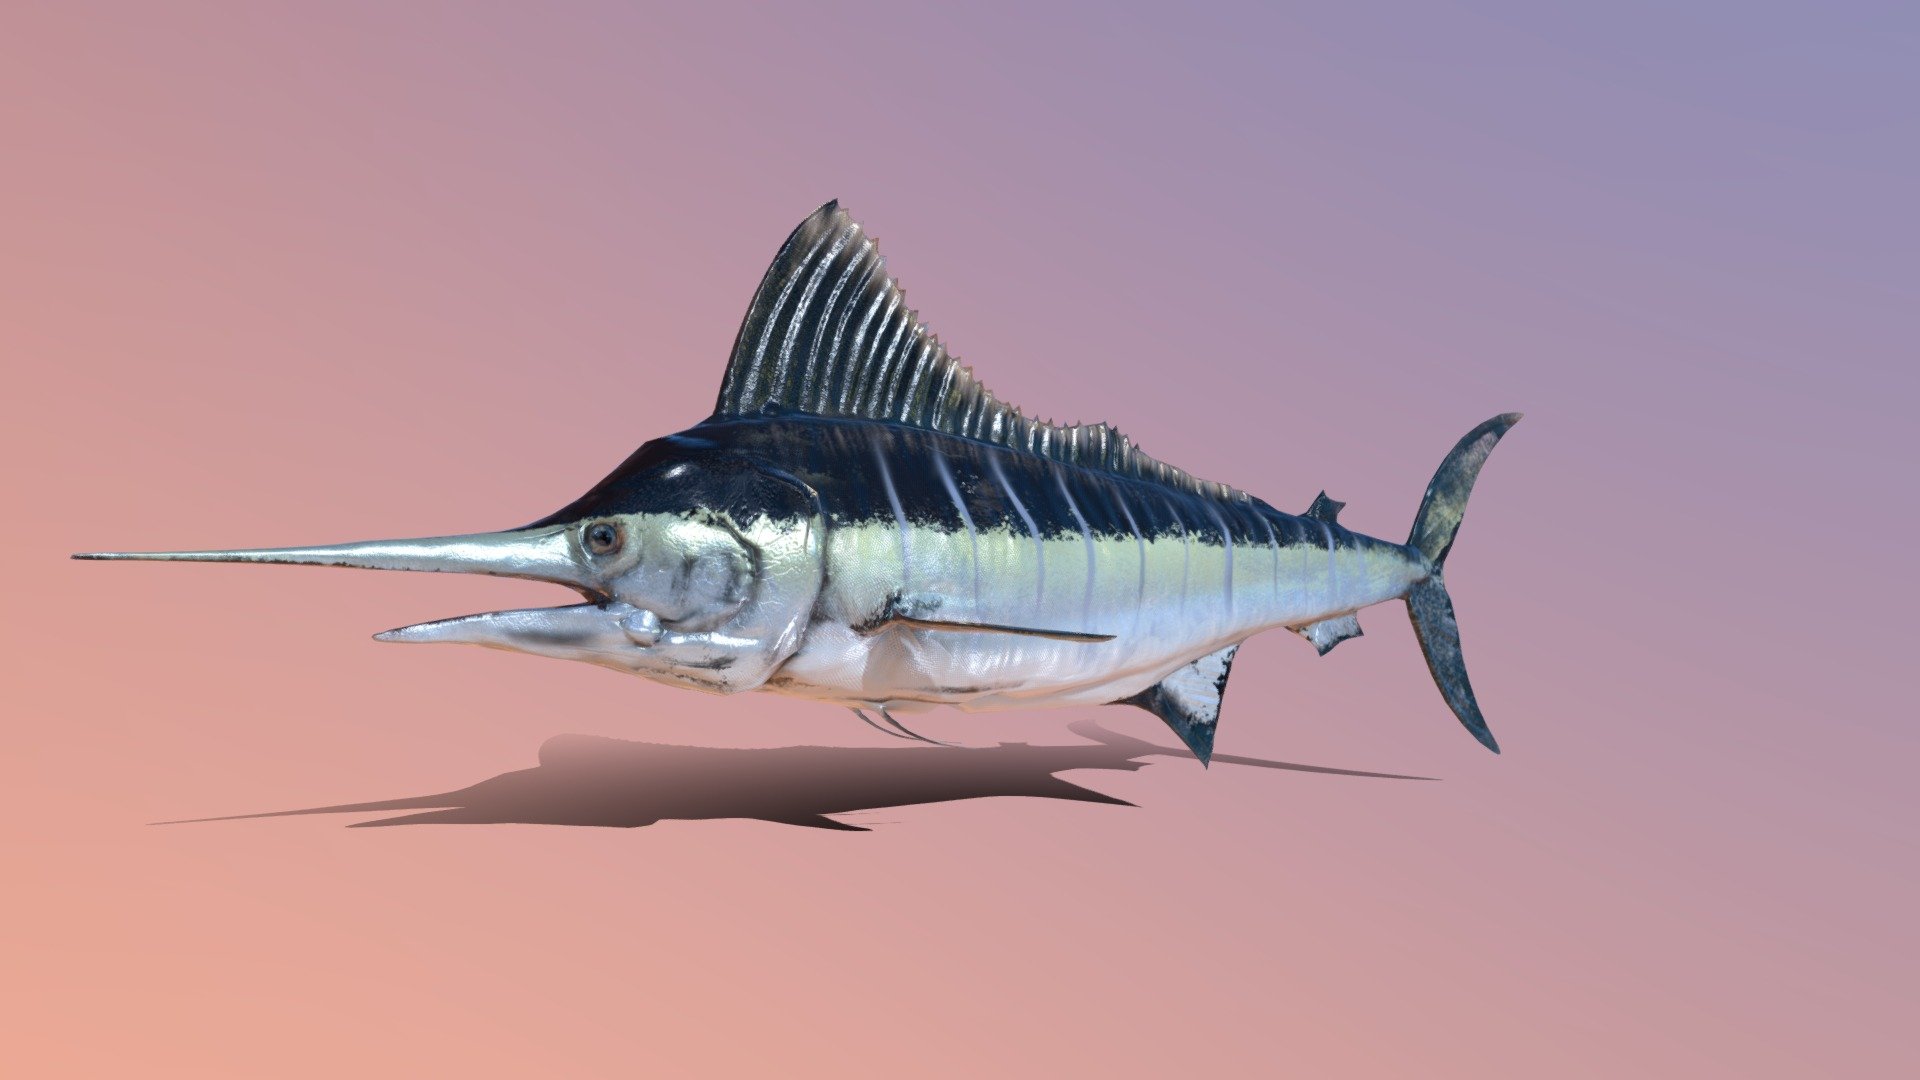 The Sword Fish 3d model was made in blender and painted in substance painter , is subdivison ready and have a clean topology , without subdivision it haves 4217 verts and with subdivision 15496 verts , It is fully rigged with basic bones , it have a total of 4 animations : idle , swim ,speed up and a atack one

The texture comes with 4k, 2k and 1k textures : diffuse , normal , metallic, roughness  and AO maps , uv wrapped it manually . 

Eyes and body , all is in one texture.

Comes with an obj ,blend file and the textures attached in rar 3d model